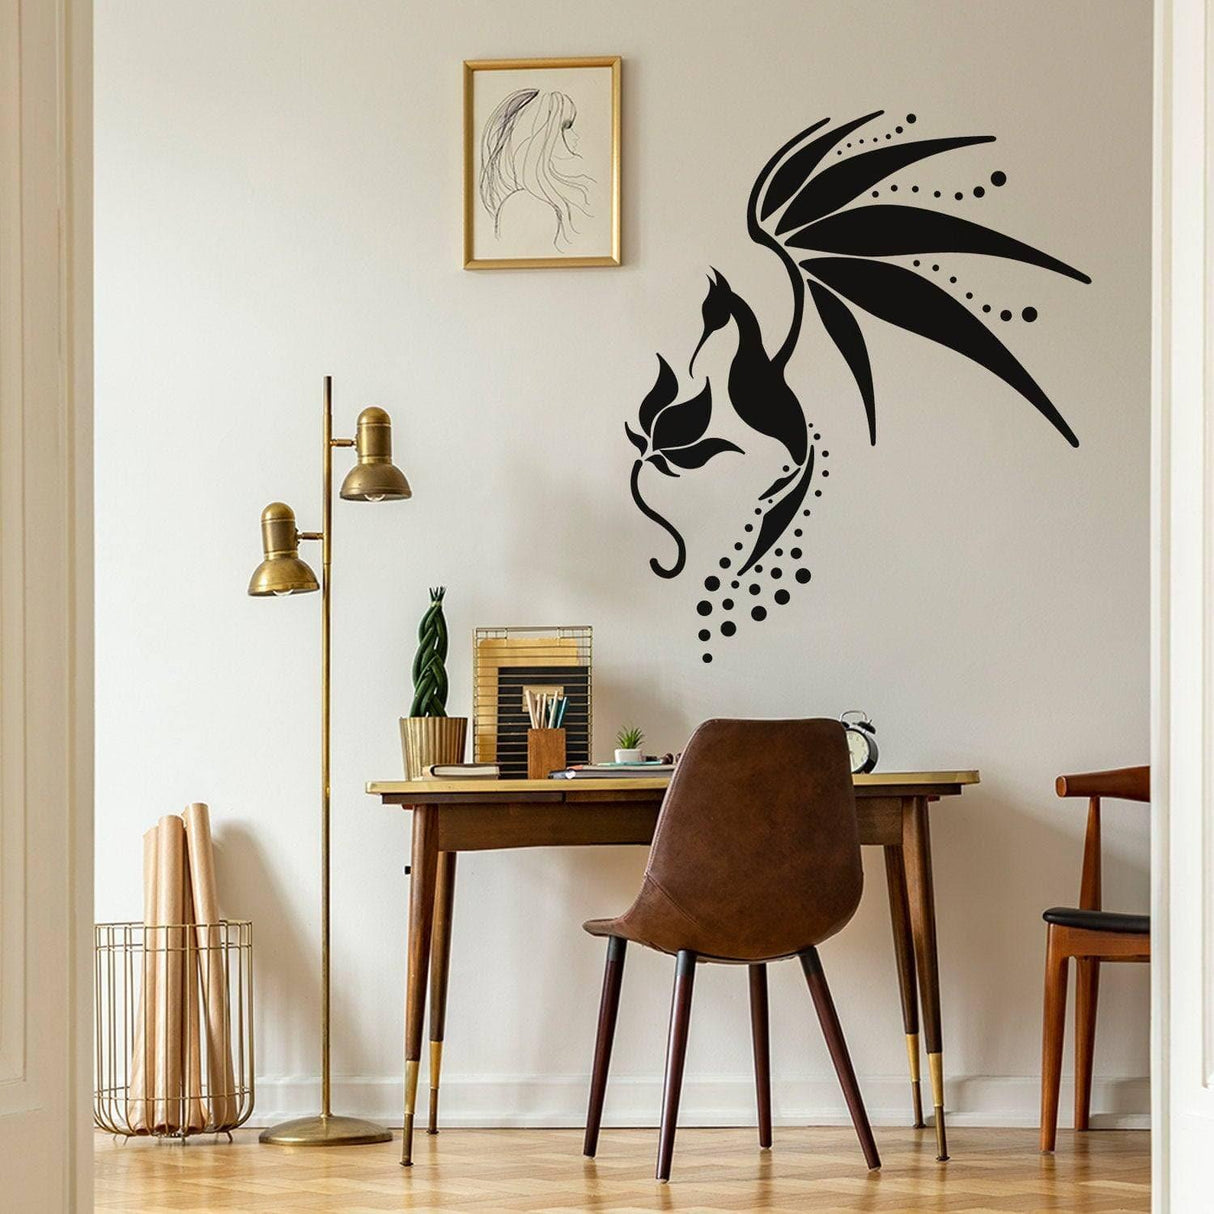 Hummingbird Wall Vinyl Sticker - Colibri Art Decor Humming Bird Cute Colorful Home Decal Gift - Waterproof Flying Tropical Exotic Baby Mural - Decords